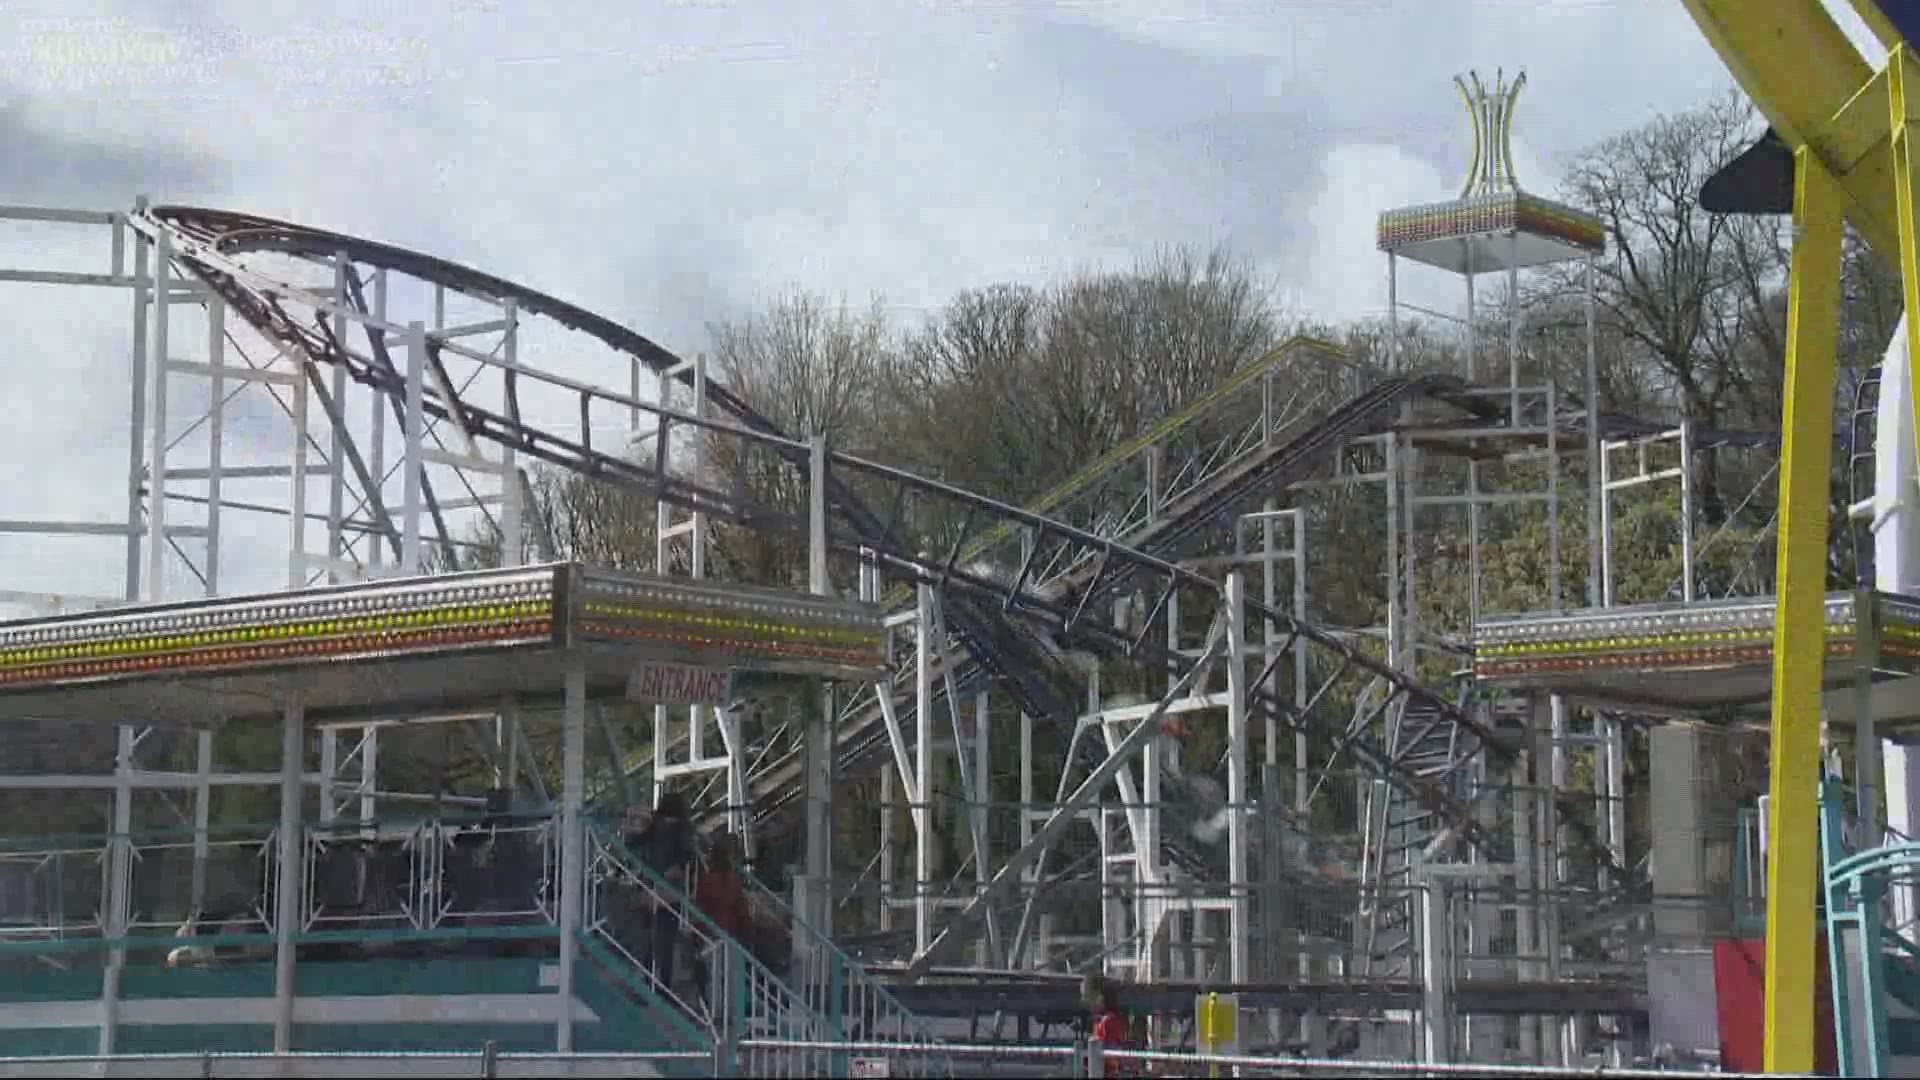 There’s a new thrill ride at Oaks Park. Chad DeHart gives us a look at The Atmosphere.